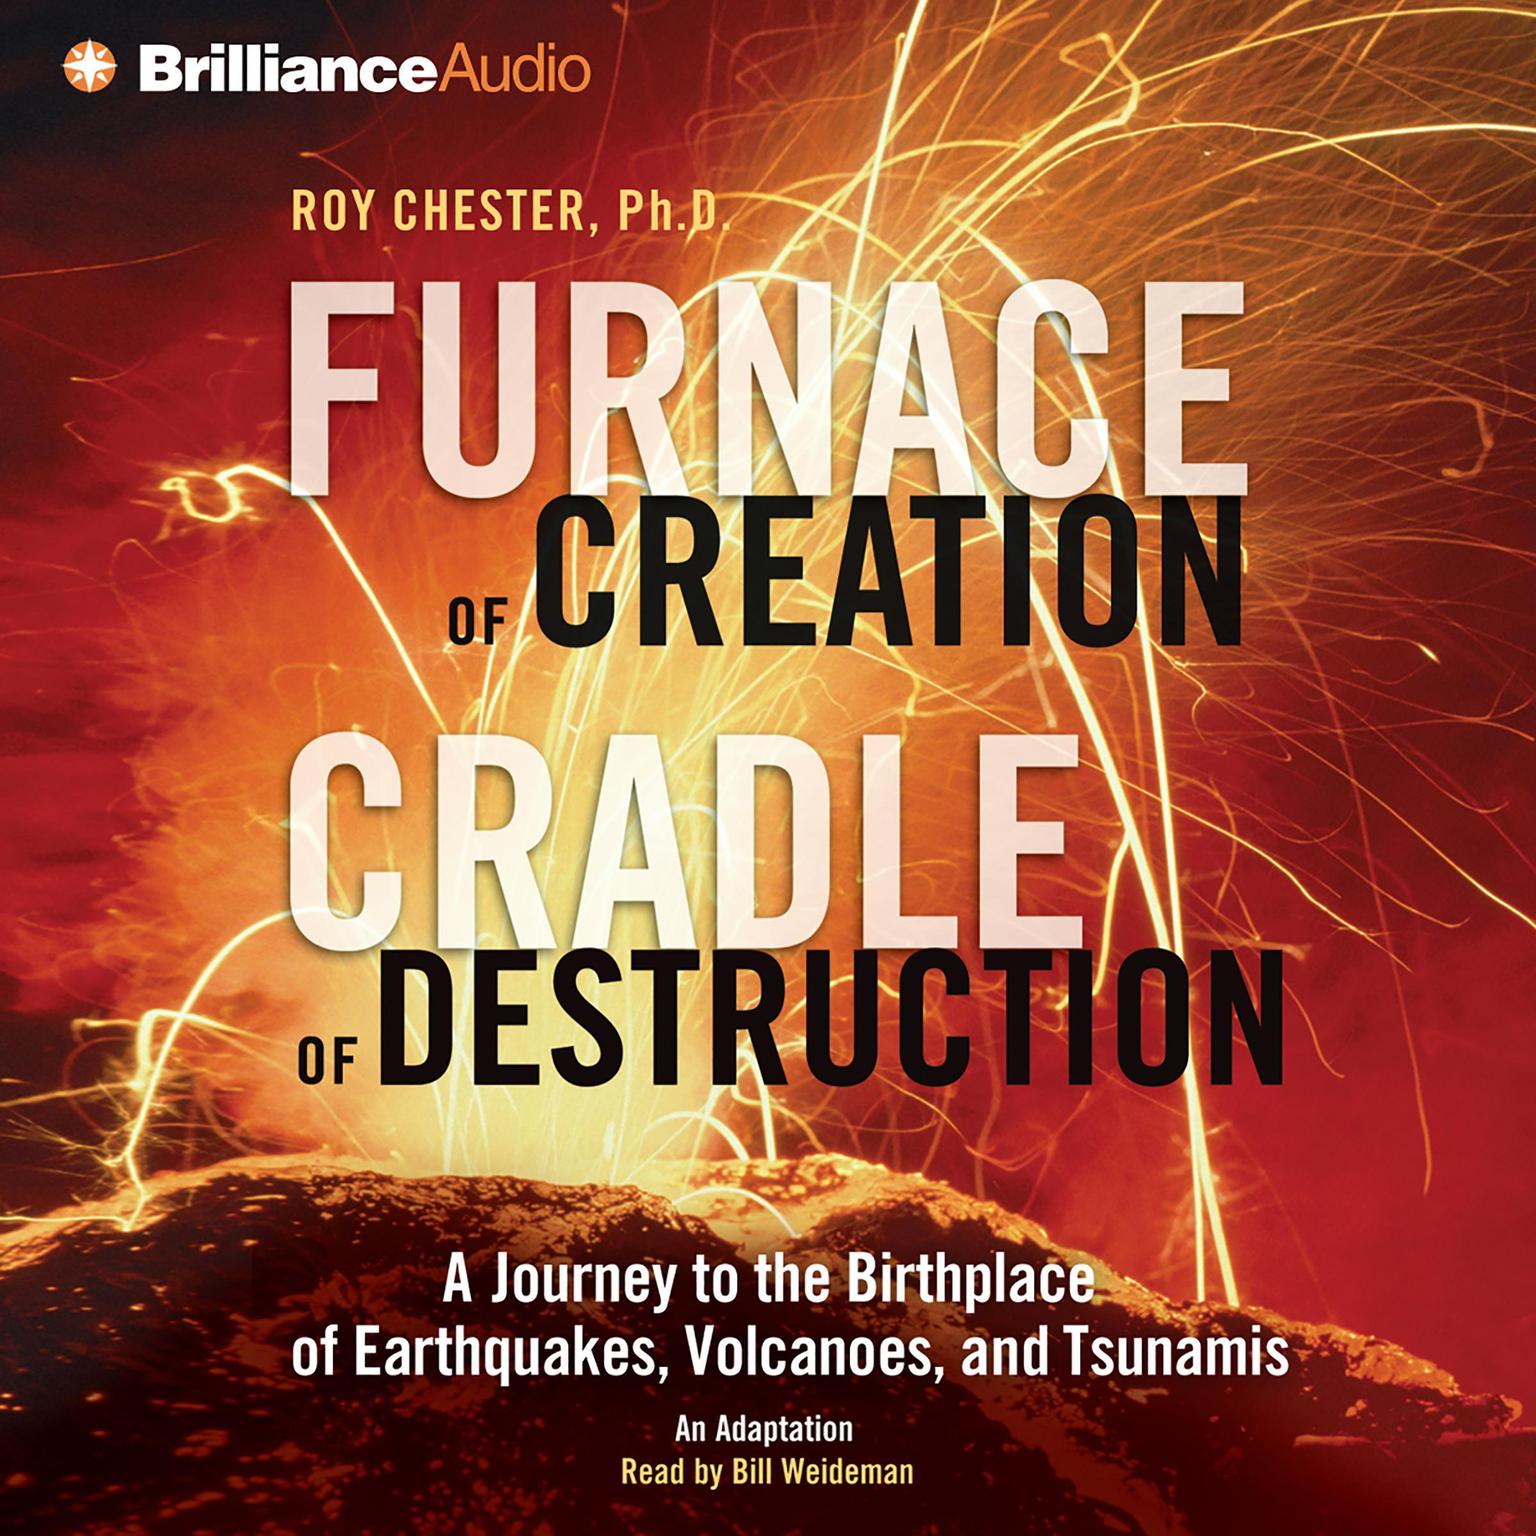 Furnace of Creation, Cradle of Destruction (Abridged): A Journey to the Birthplace of Earthquakes, Volcanoes, and Tsunamis Audiobook, by Roy Chester